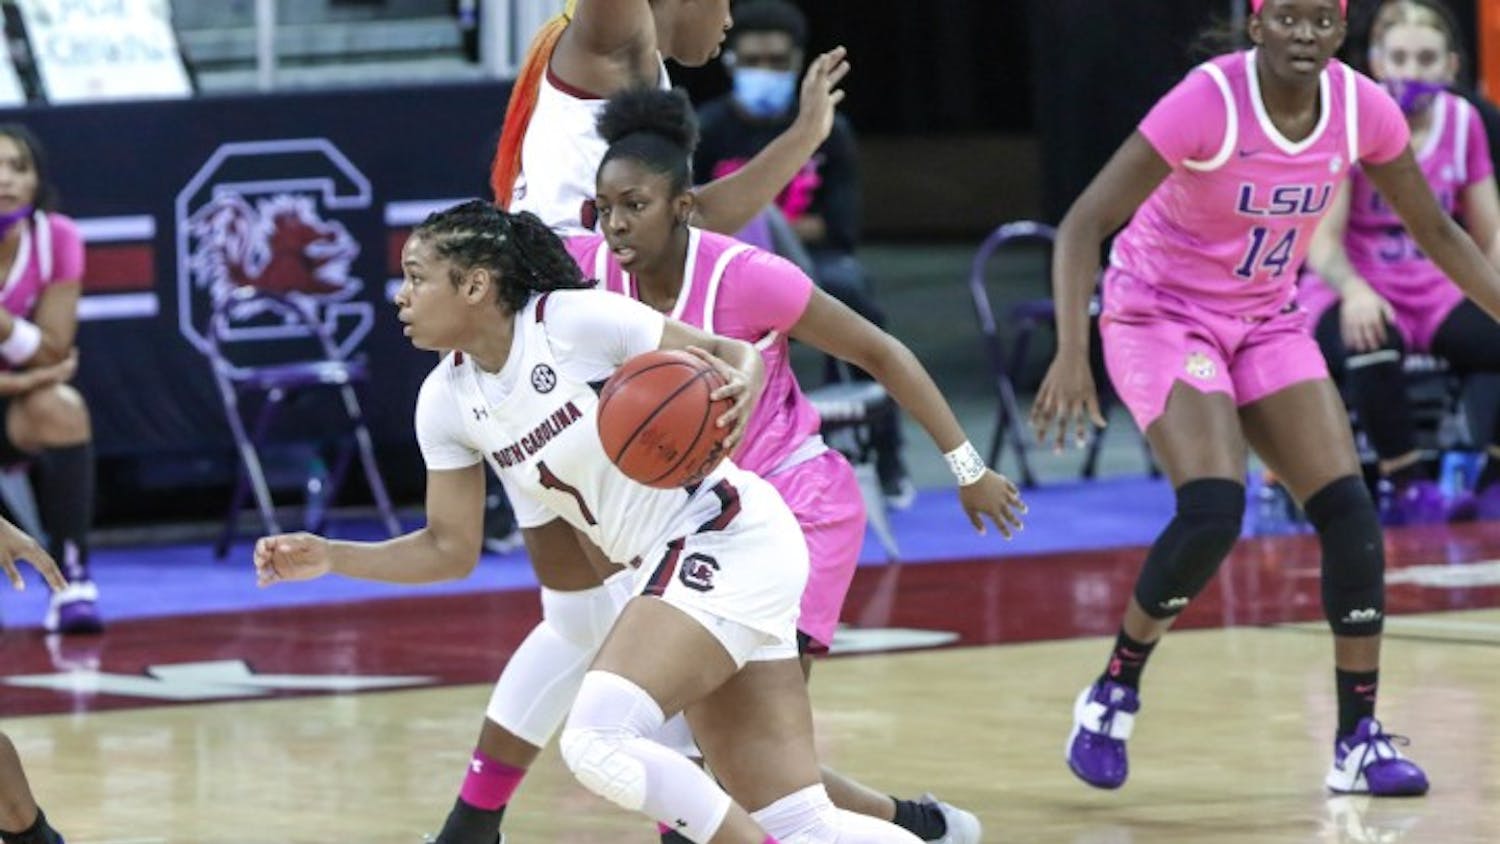 Sophomore guard Zia Cooke dribbles past a defender in South Carolina's win over LSU. The Gamecocks improved to 17-2 following the win.